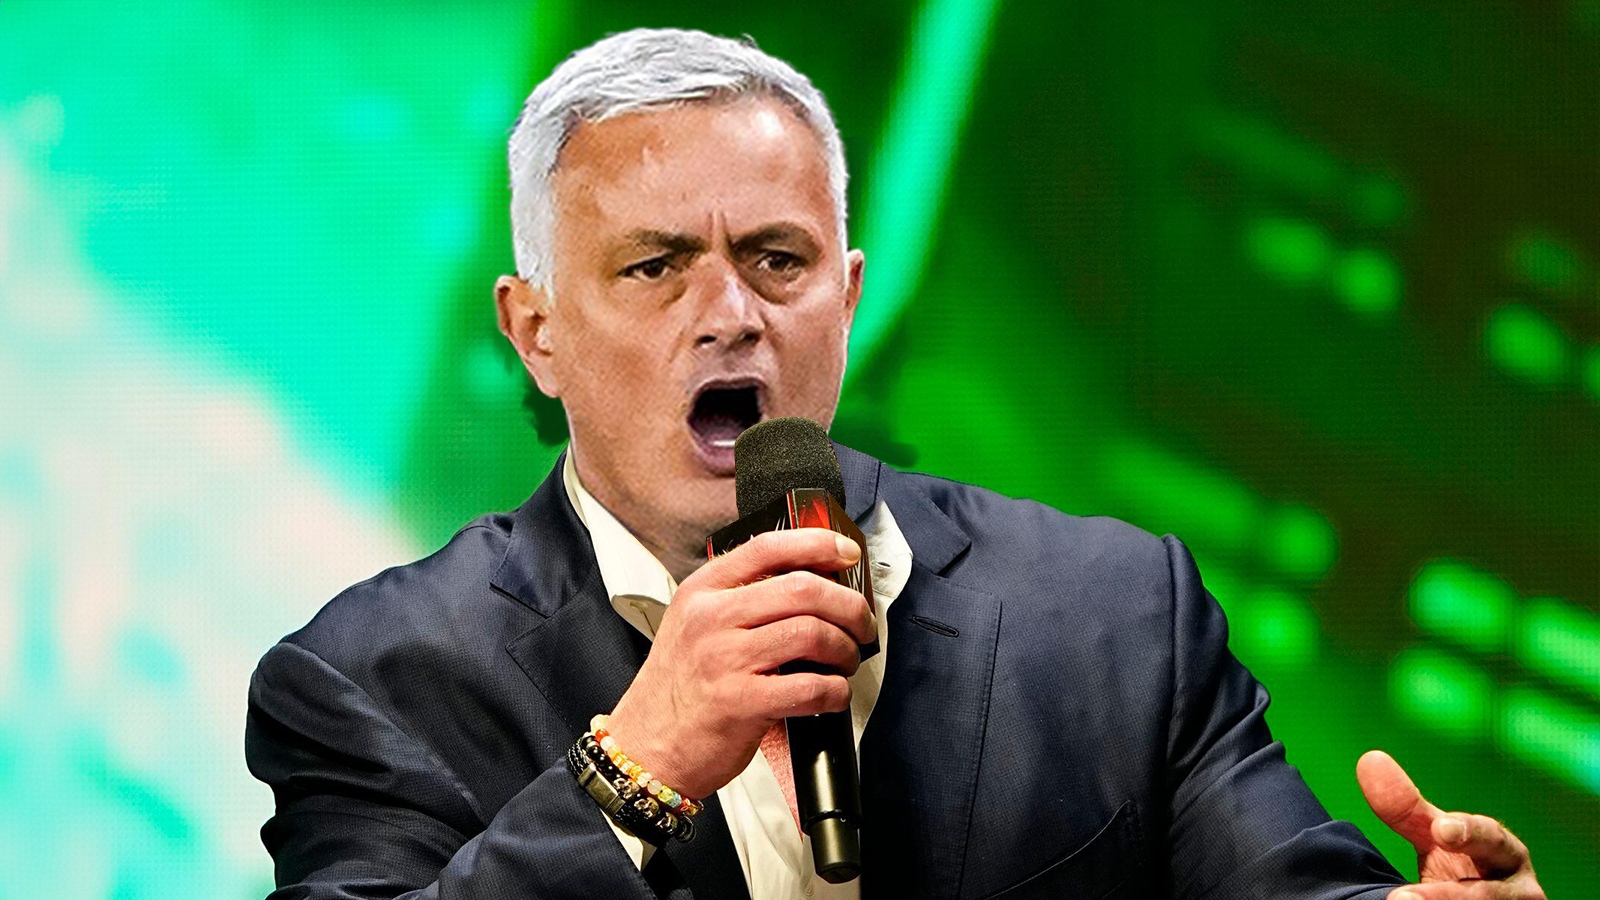 6 alternative careers for jose mourinho if he retired from football management